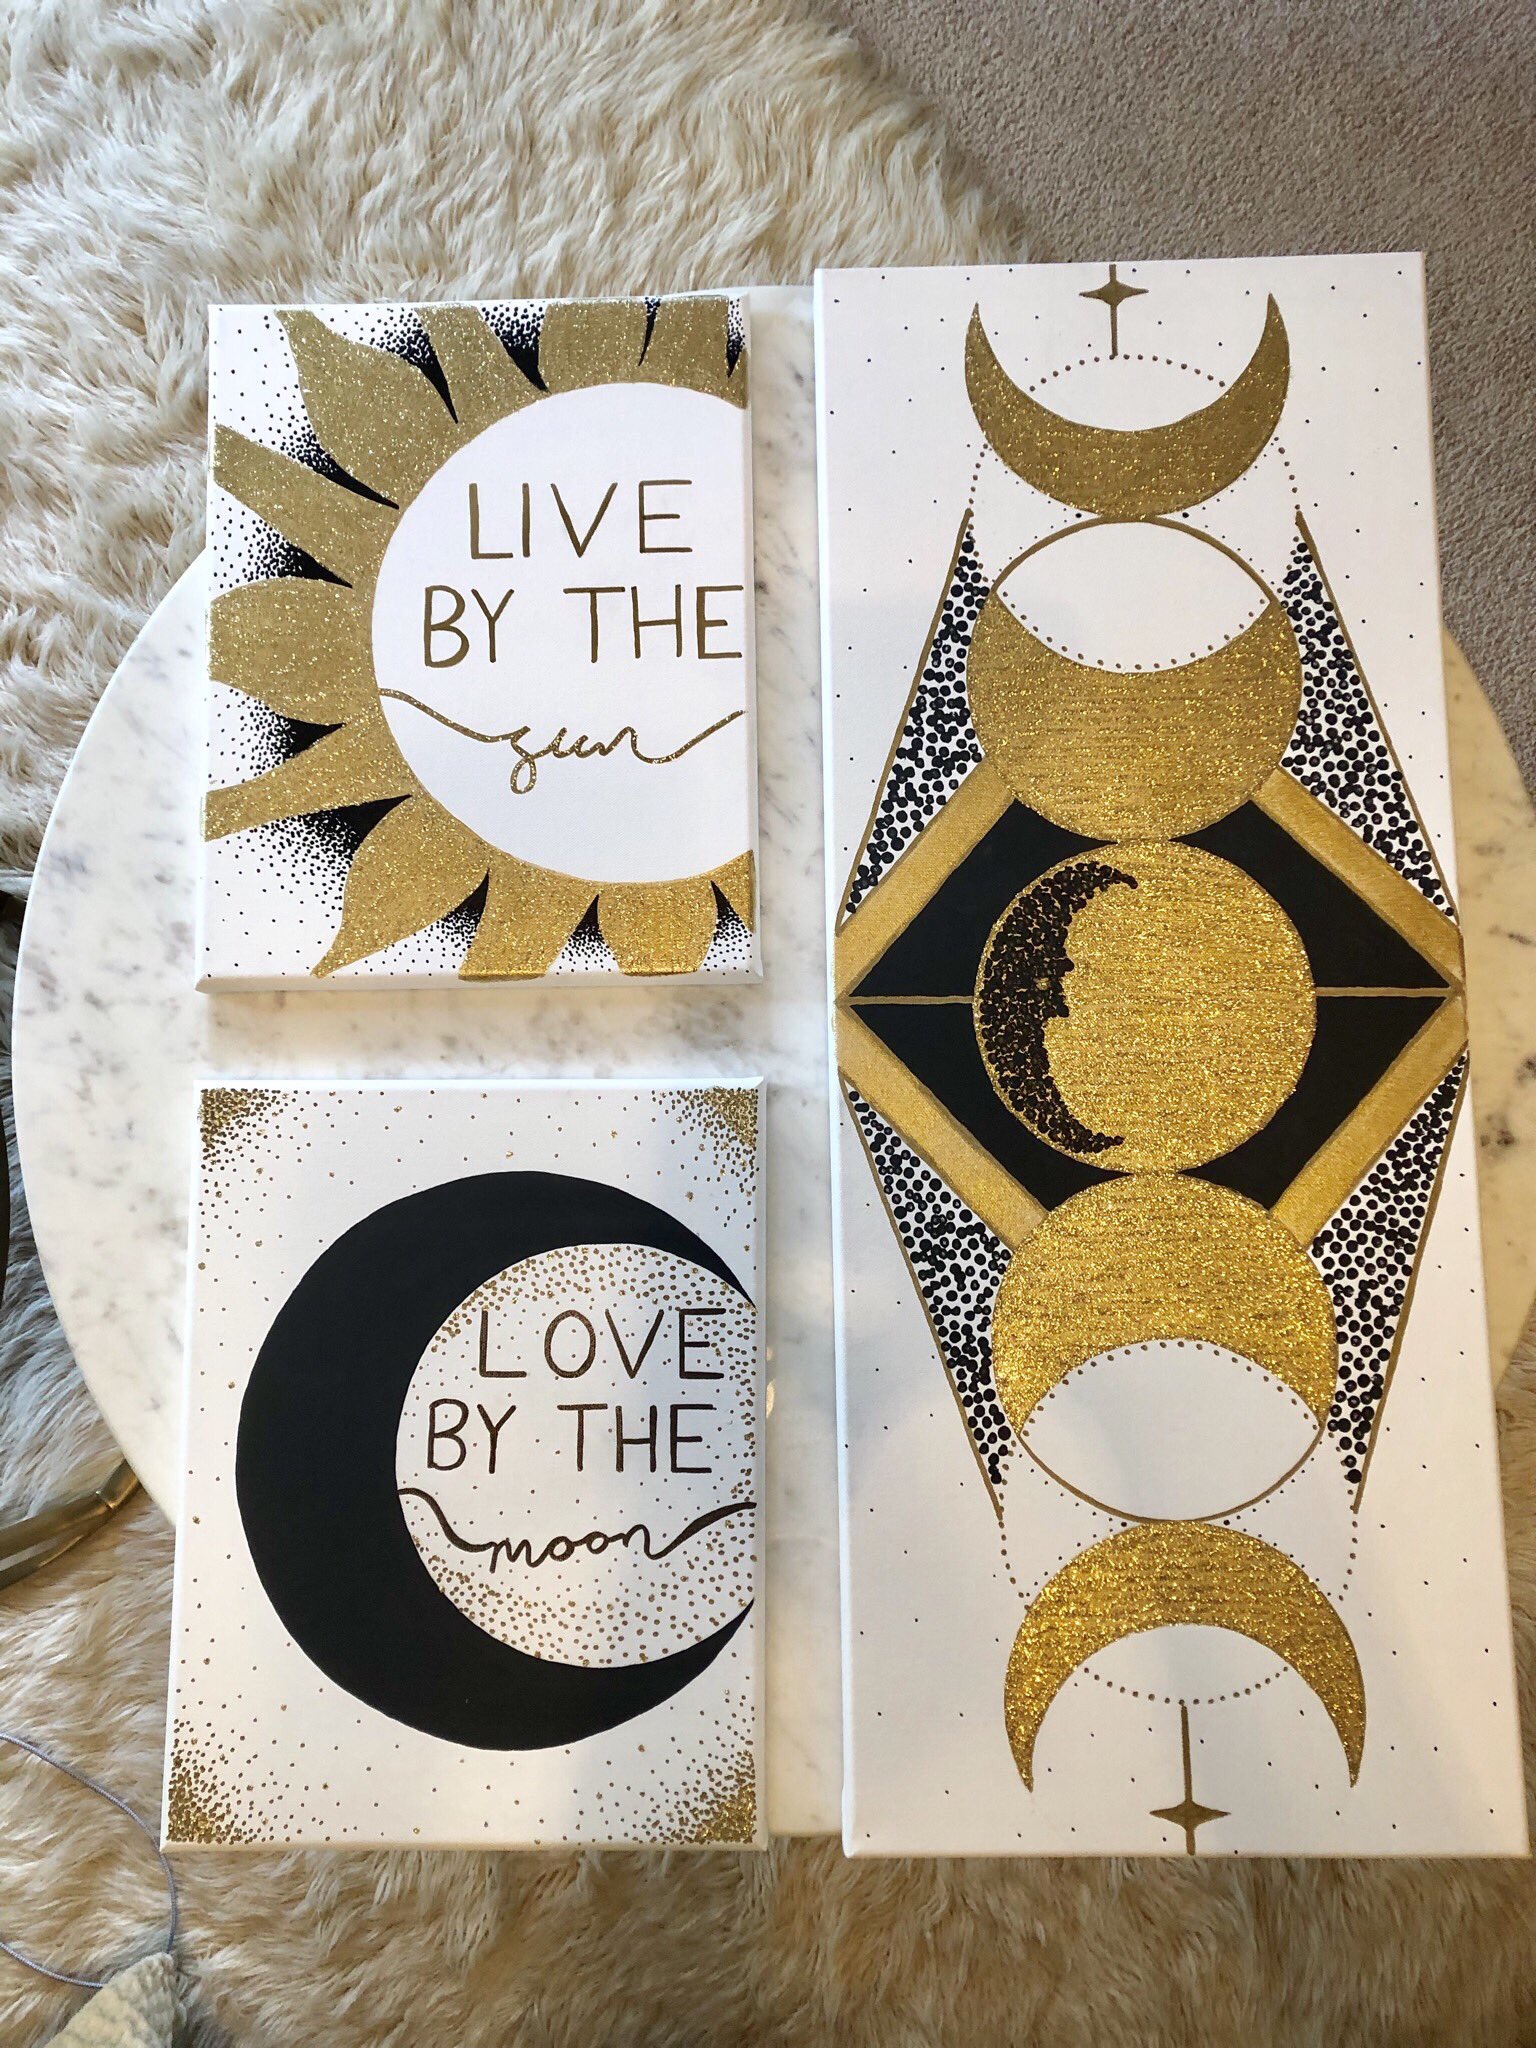 A larger scale sun and moon collection. All on wrapped canvas the gold sun and moon canvas sit to the left of a larger and wider canvas with a slightly more geometric version of the gold moon phases.